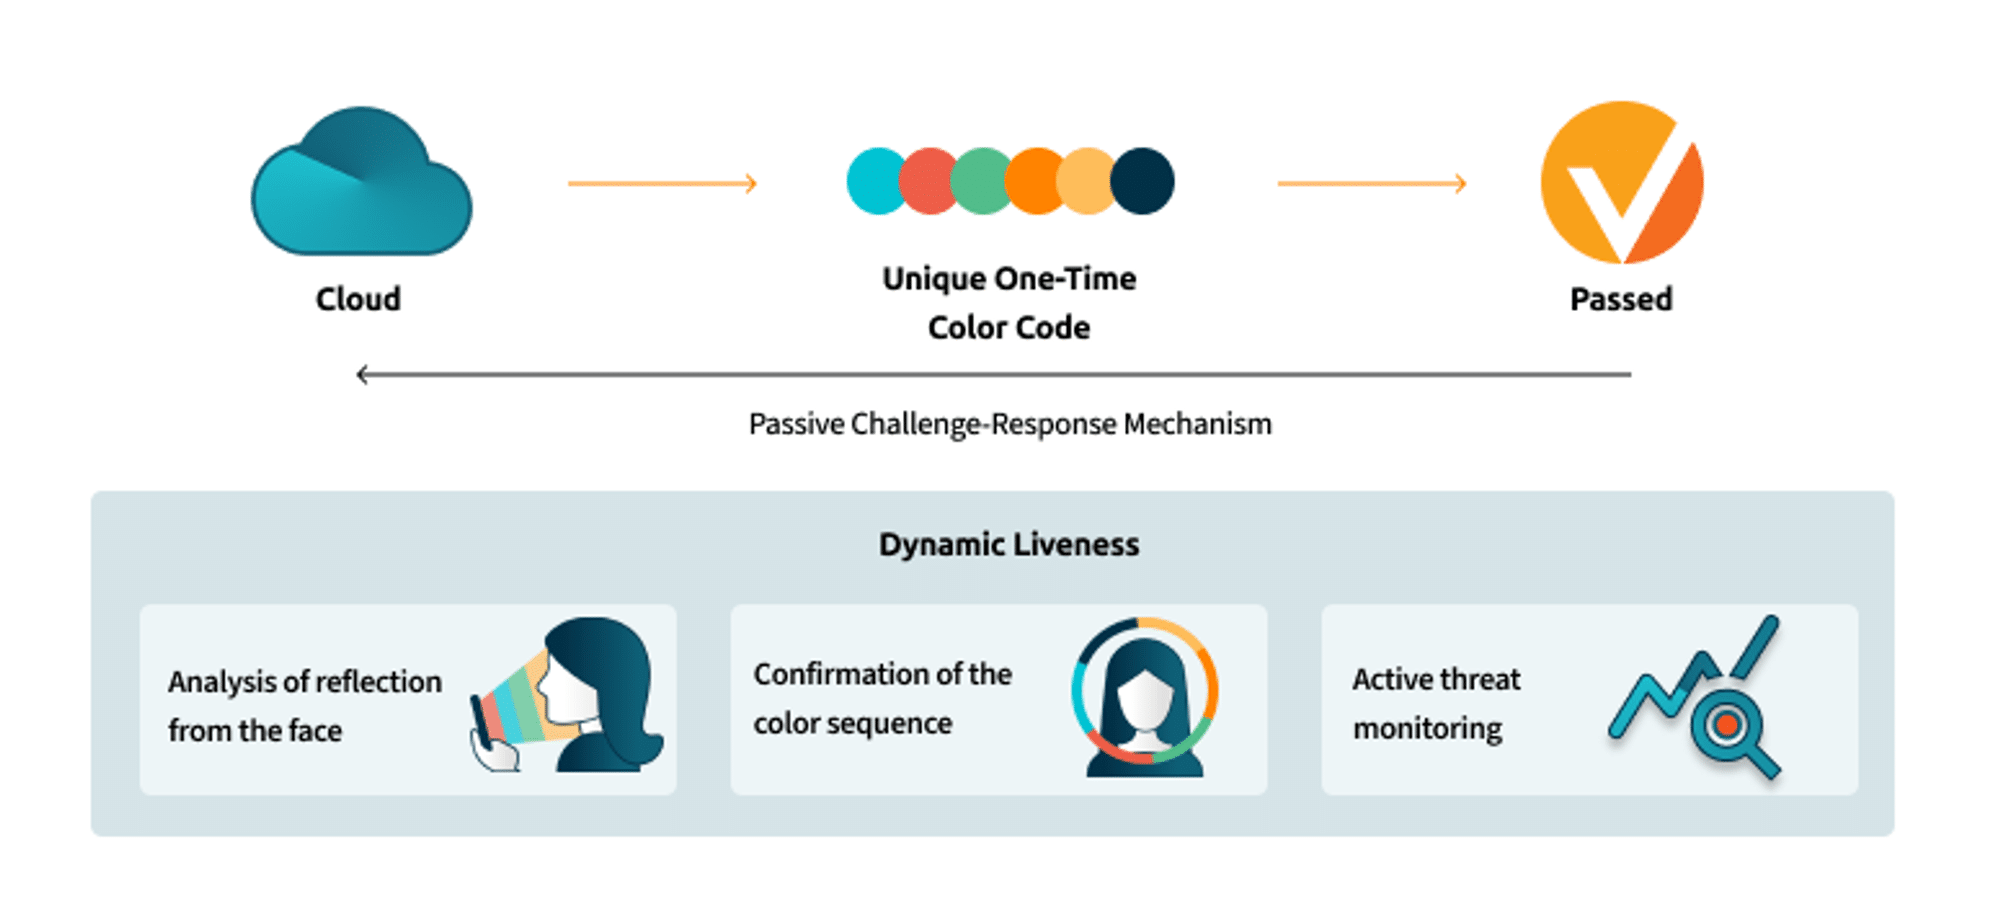 Dynamic Liveness Explanation (infographic showing cloud, one-time biometric color sequence, and a "passed" icon